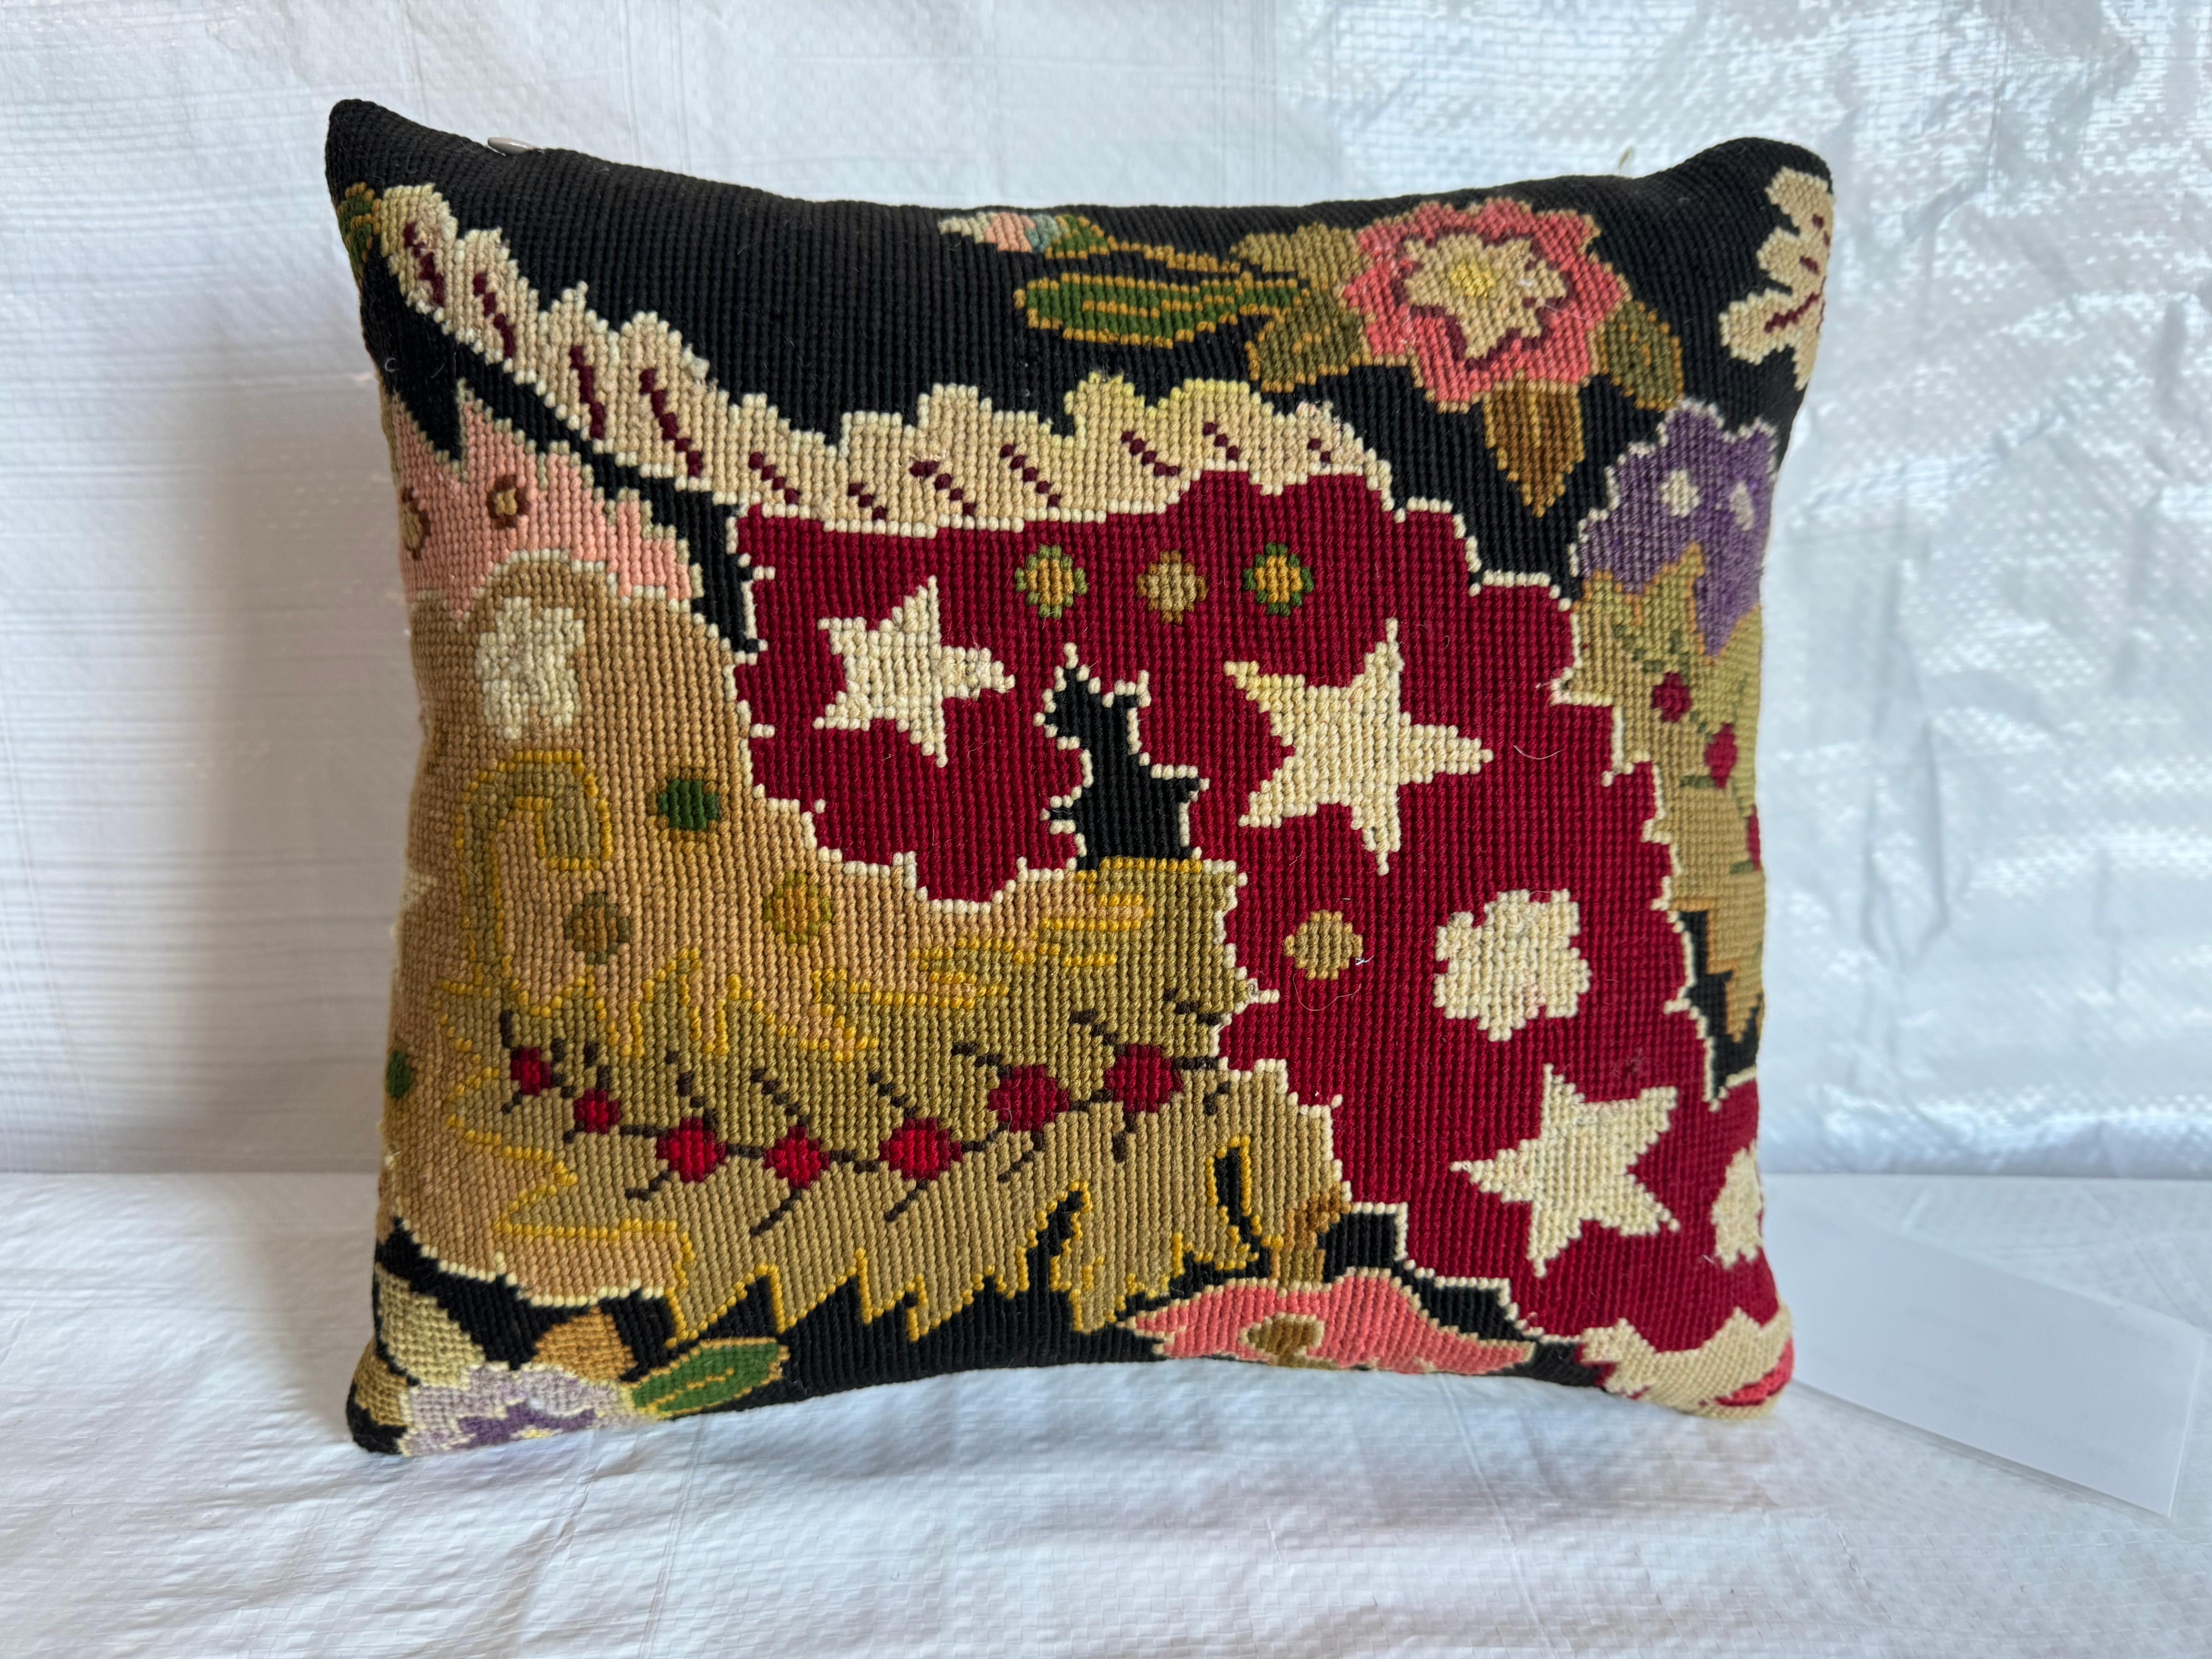 Discover elegance with the English Needlework Pillow, measuring 12